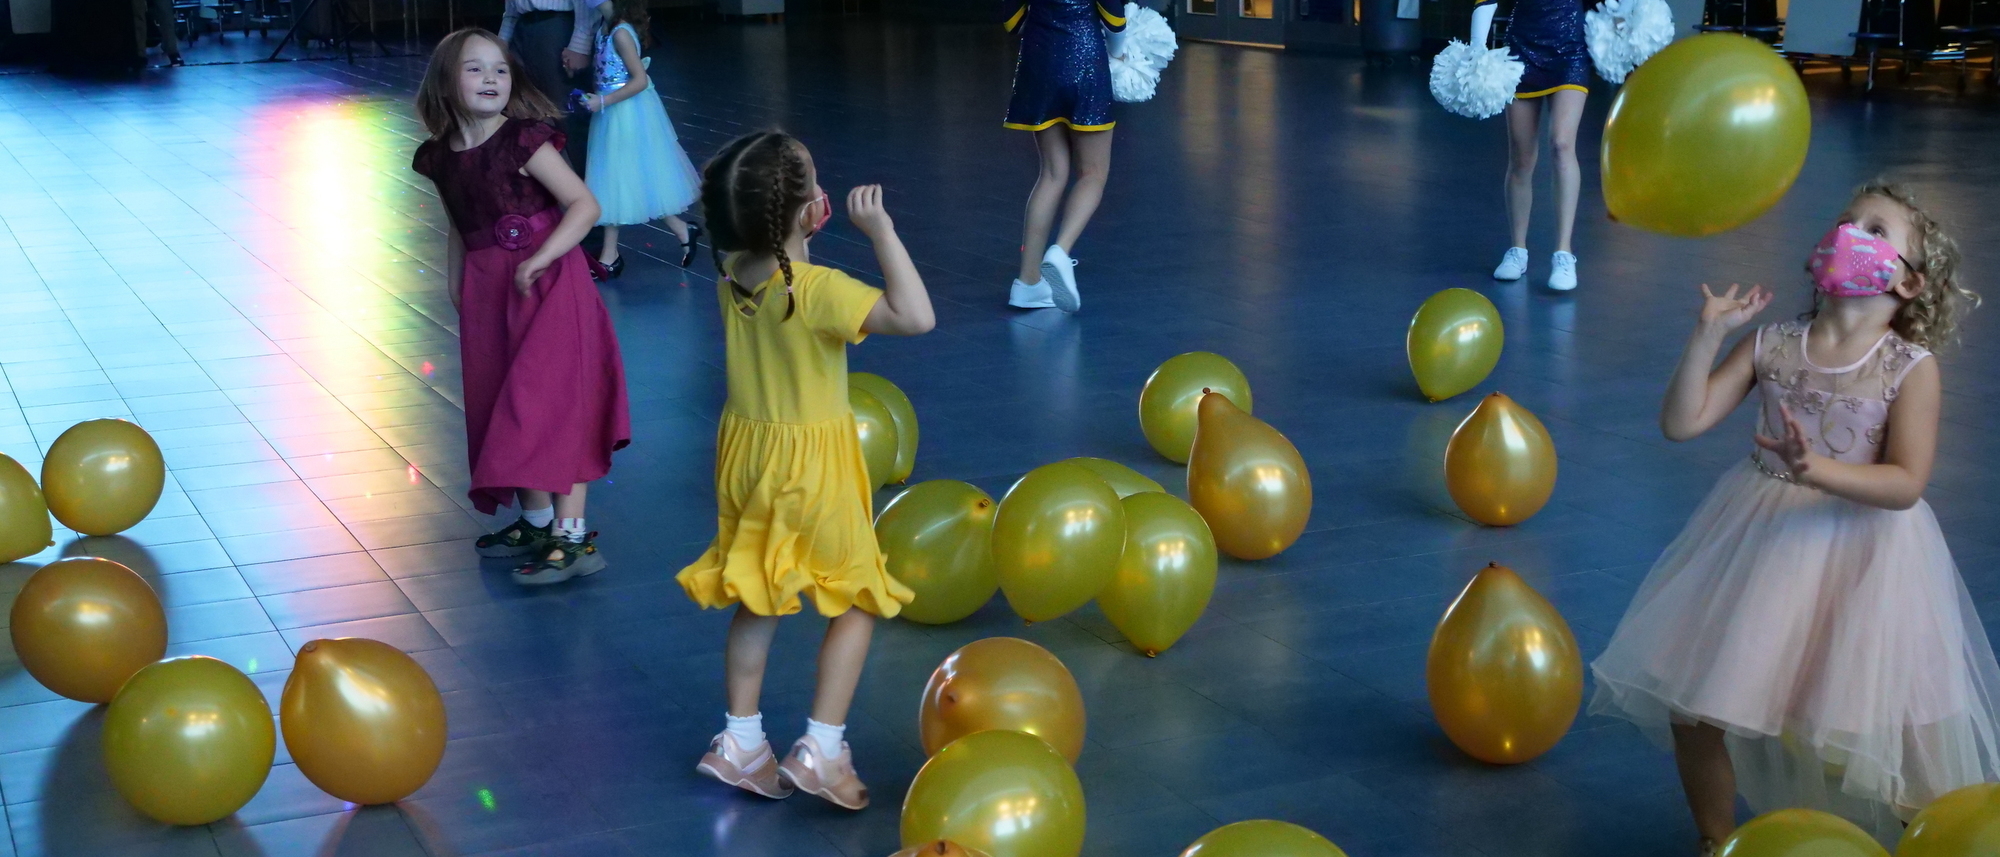 Girl in yellow dress dancing with yellow balloons.